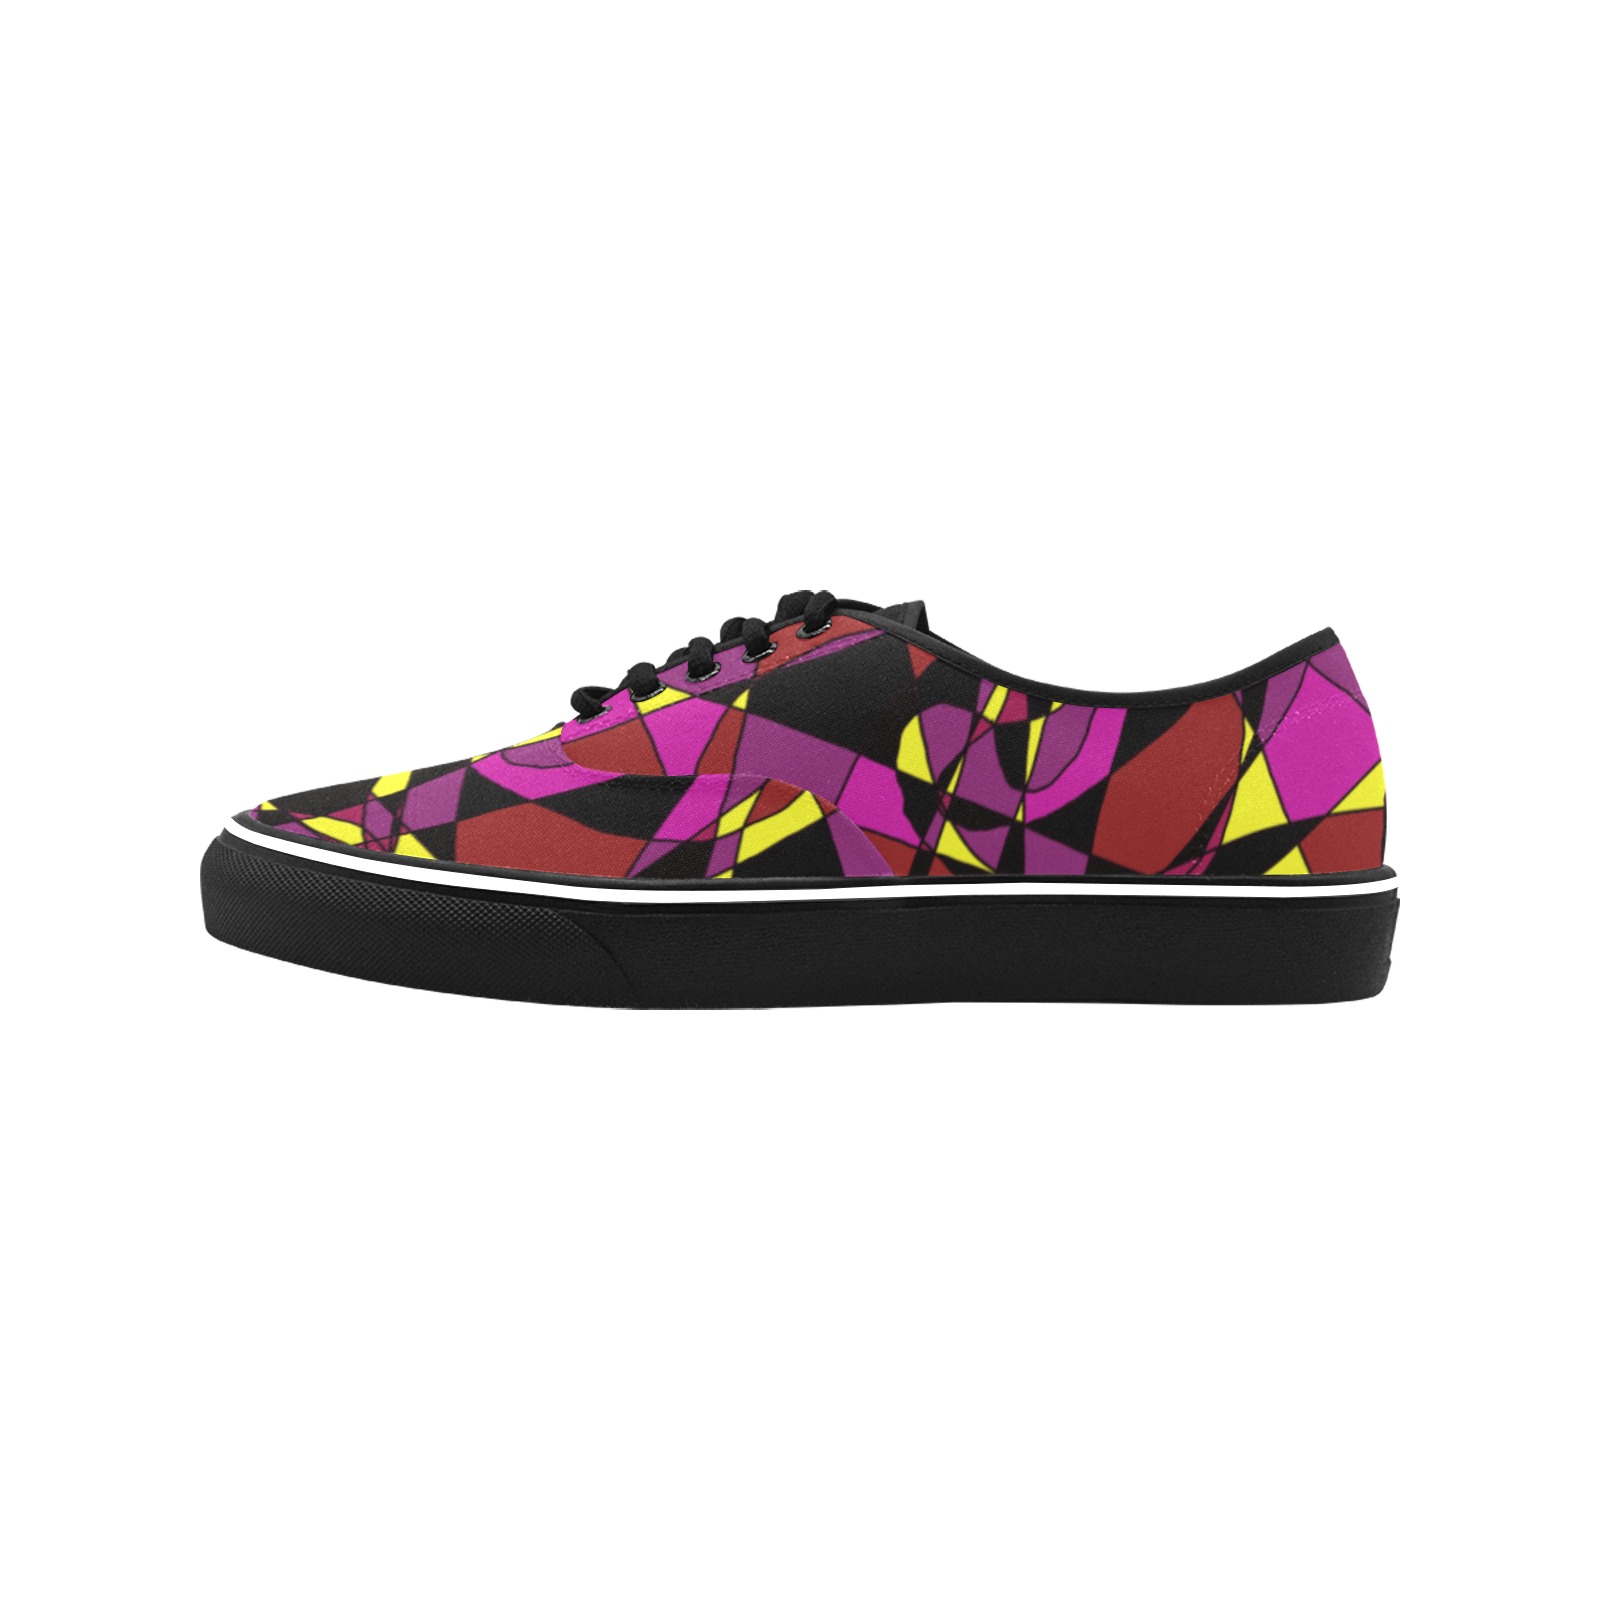 Multicolor Abstract Design S2020 Classic Women's Canvas Low Top Shoes (Model E001-4)